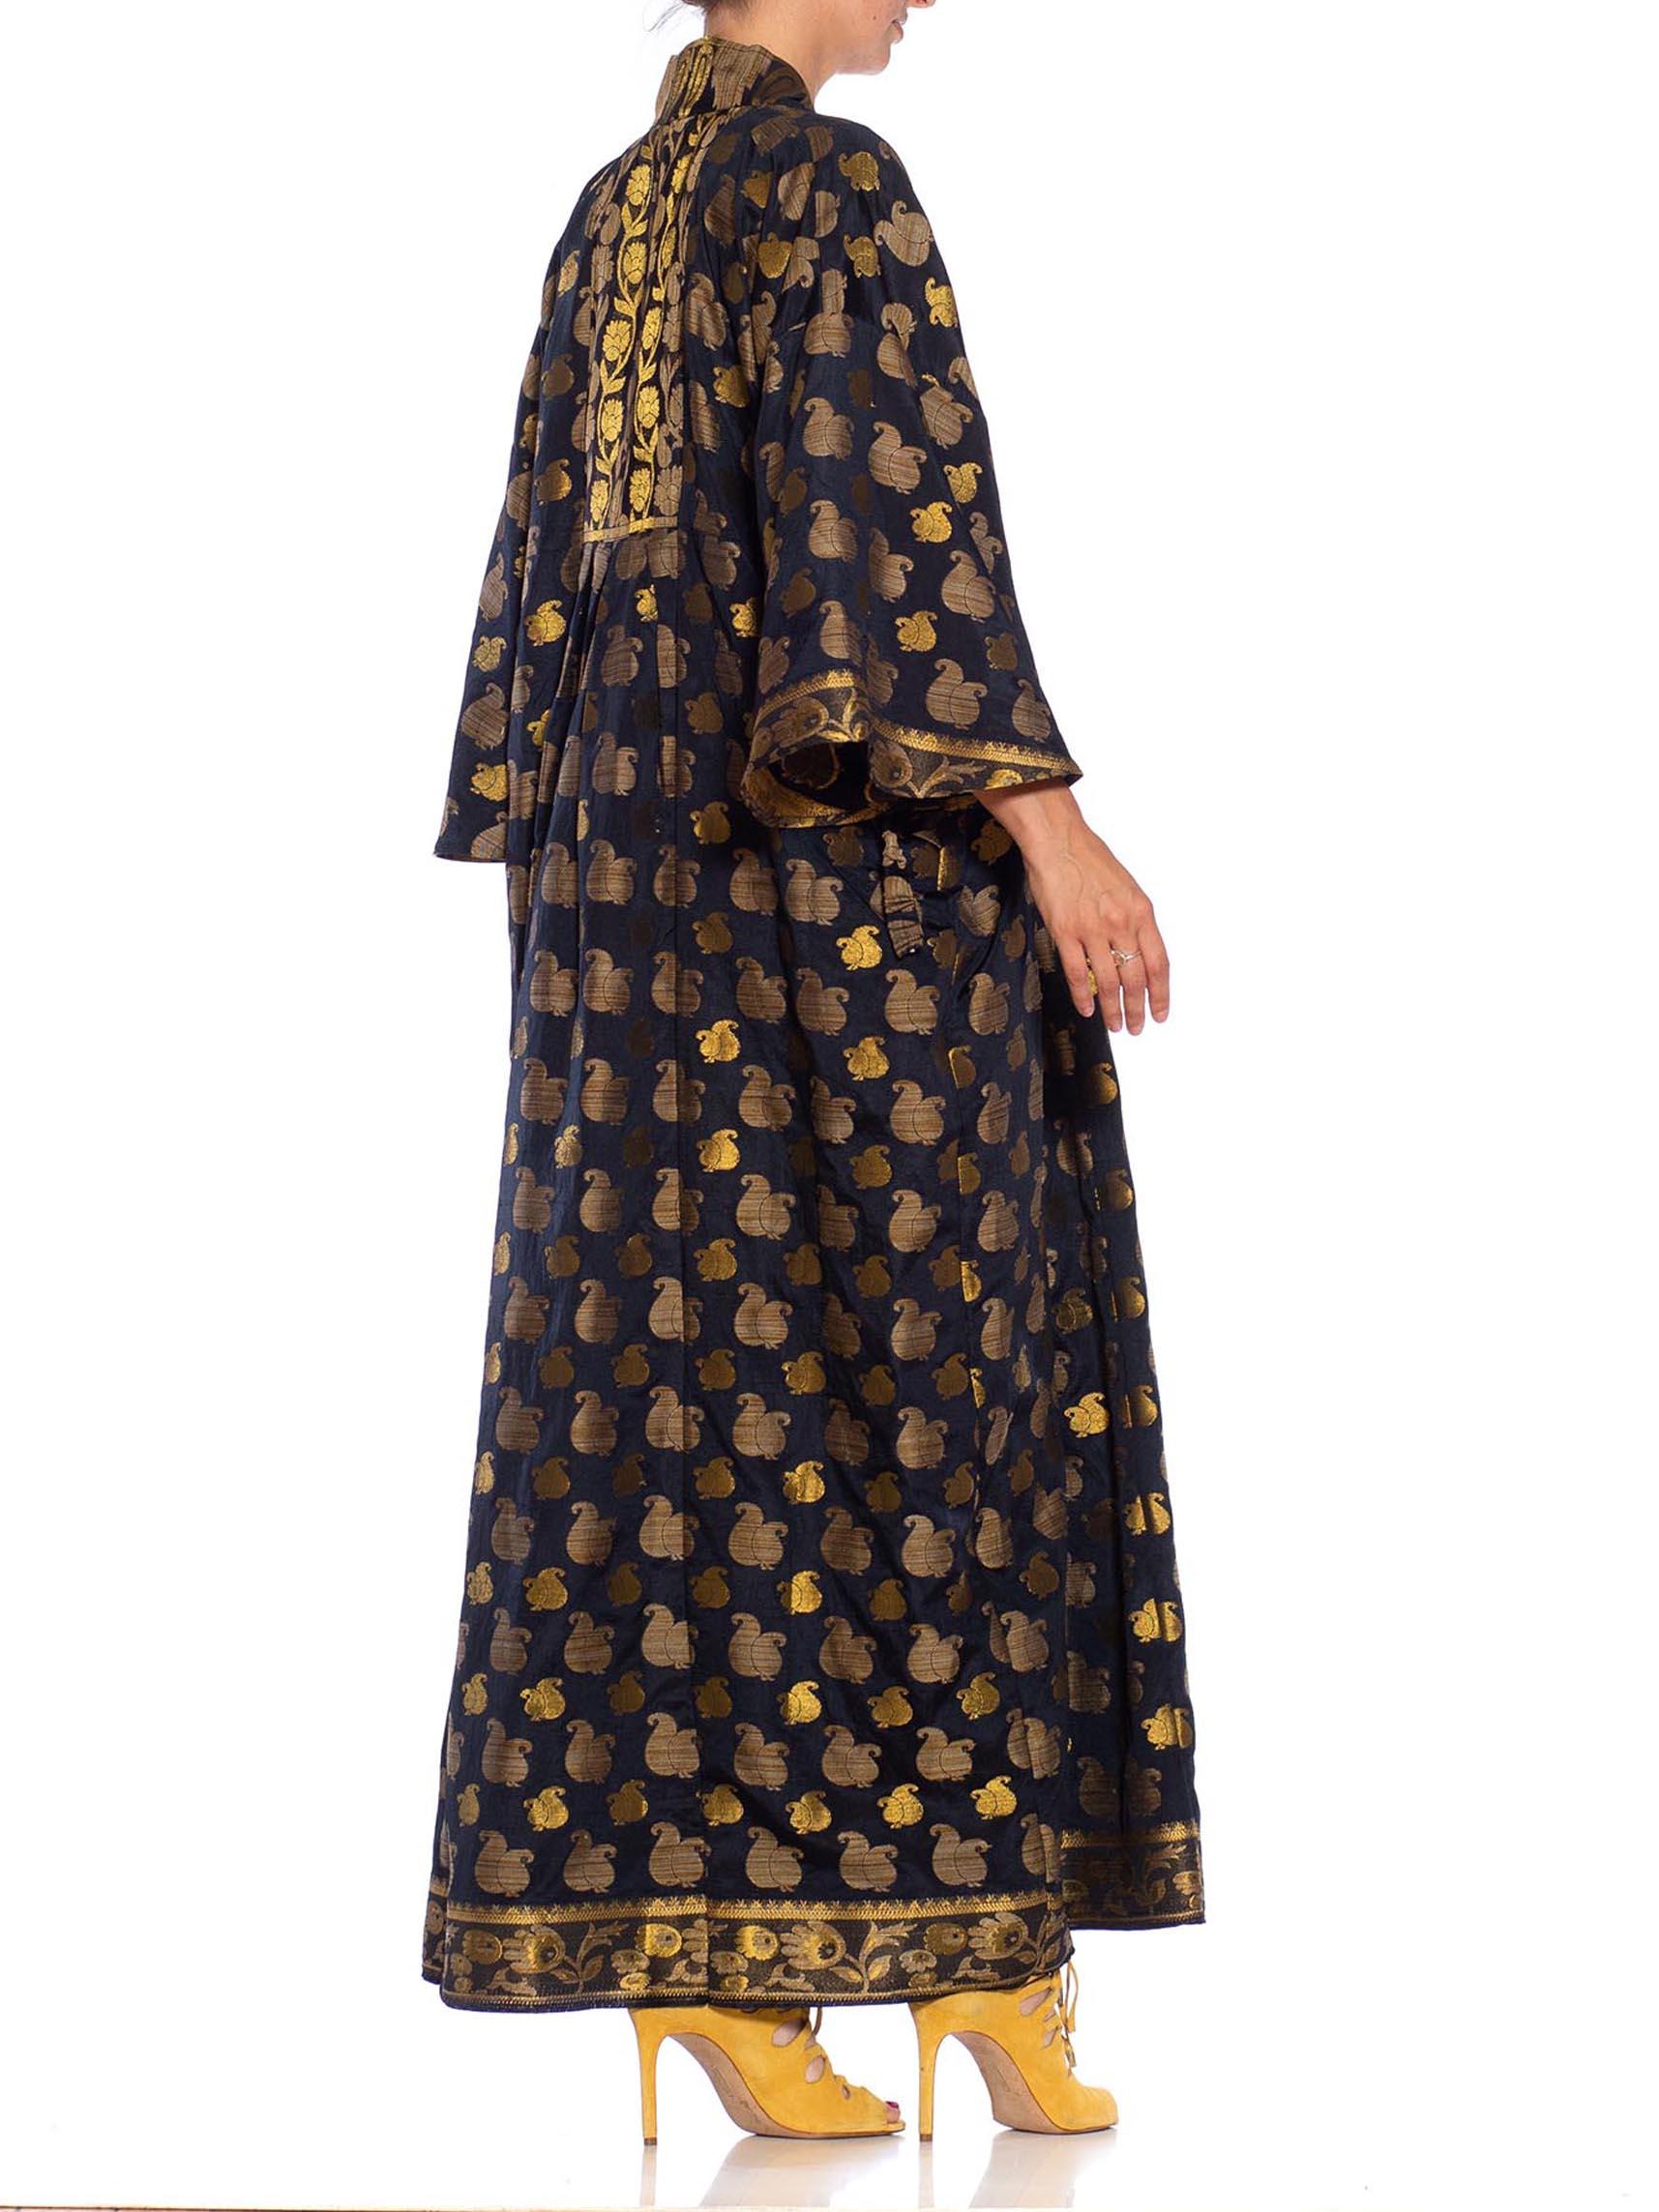 MORPHEW COLLECTION Black & Gold Metallic Silk Kaftan Made From Vintage Saris
MORPHEW COLLECTION is made entirely by hand in our NYC Ateliér of rare antique materials sourced from around the globe. Our sustainable vintage materials represent over a